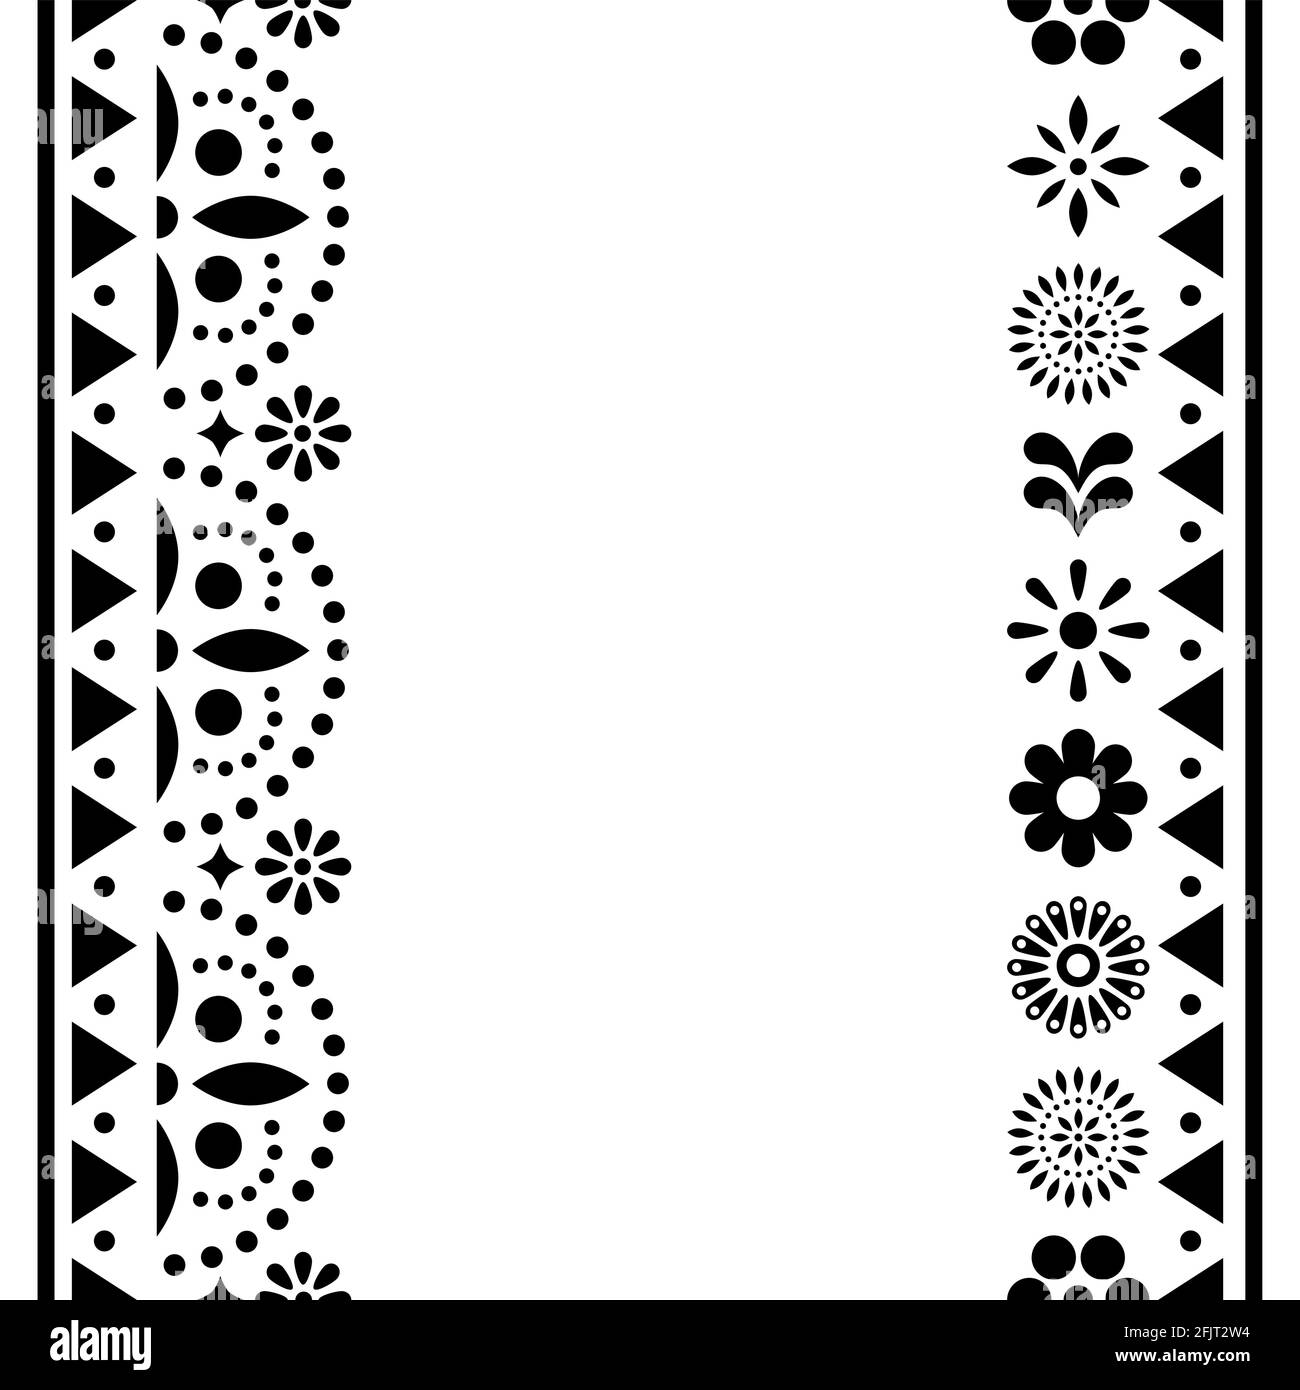 Mexican happy vector greeting card or invitation design, black and white pattern with flowers and geometric shapes Stock Vector